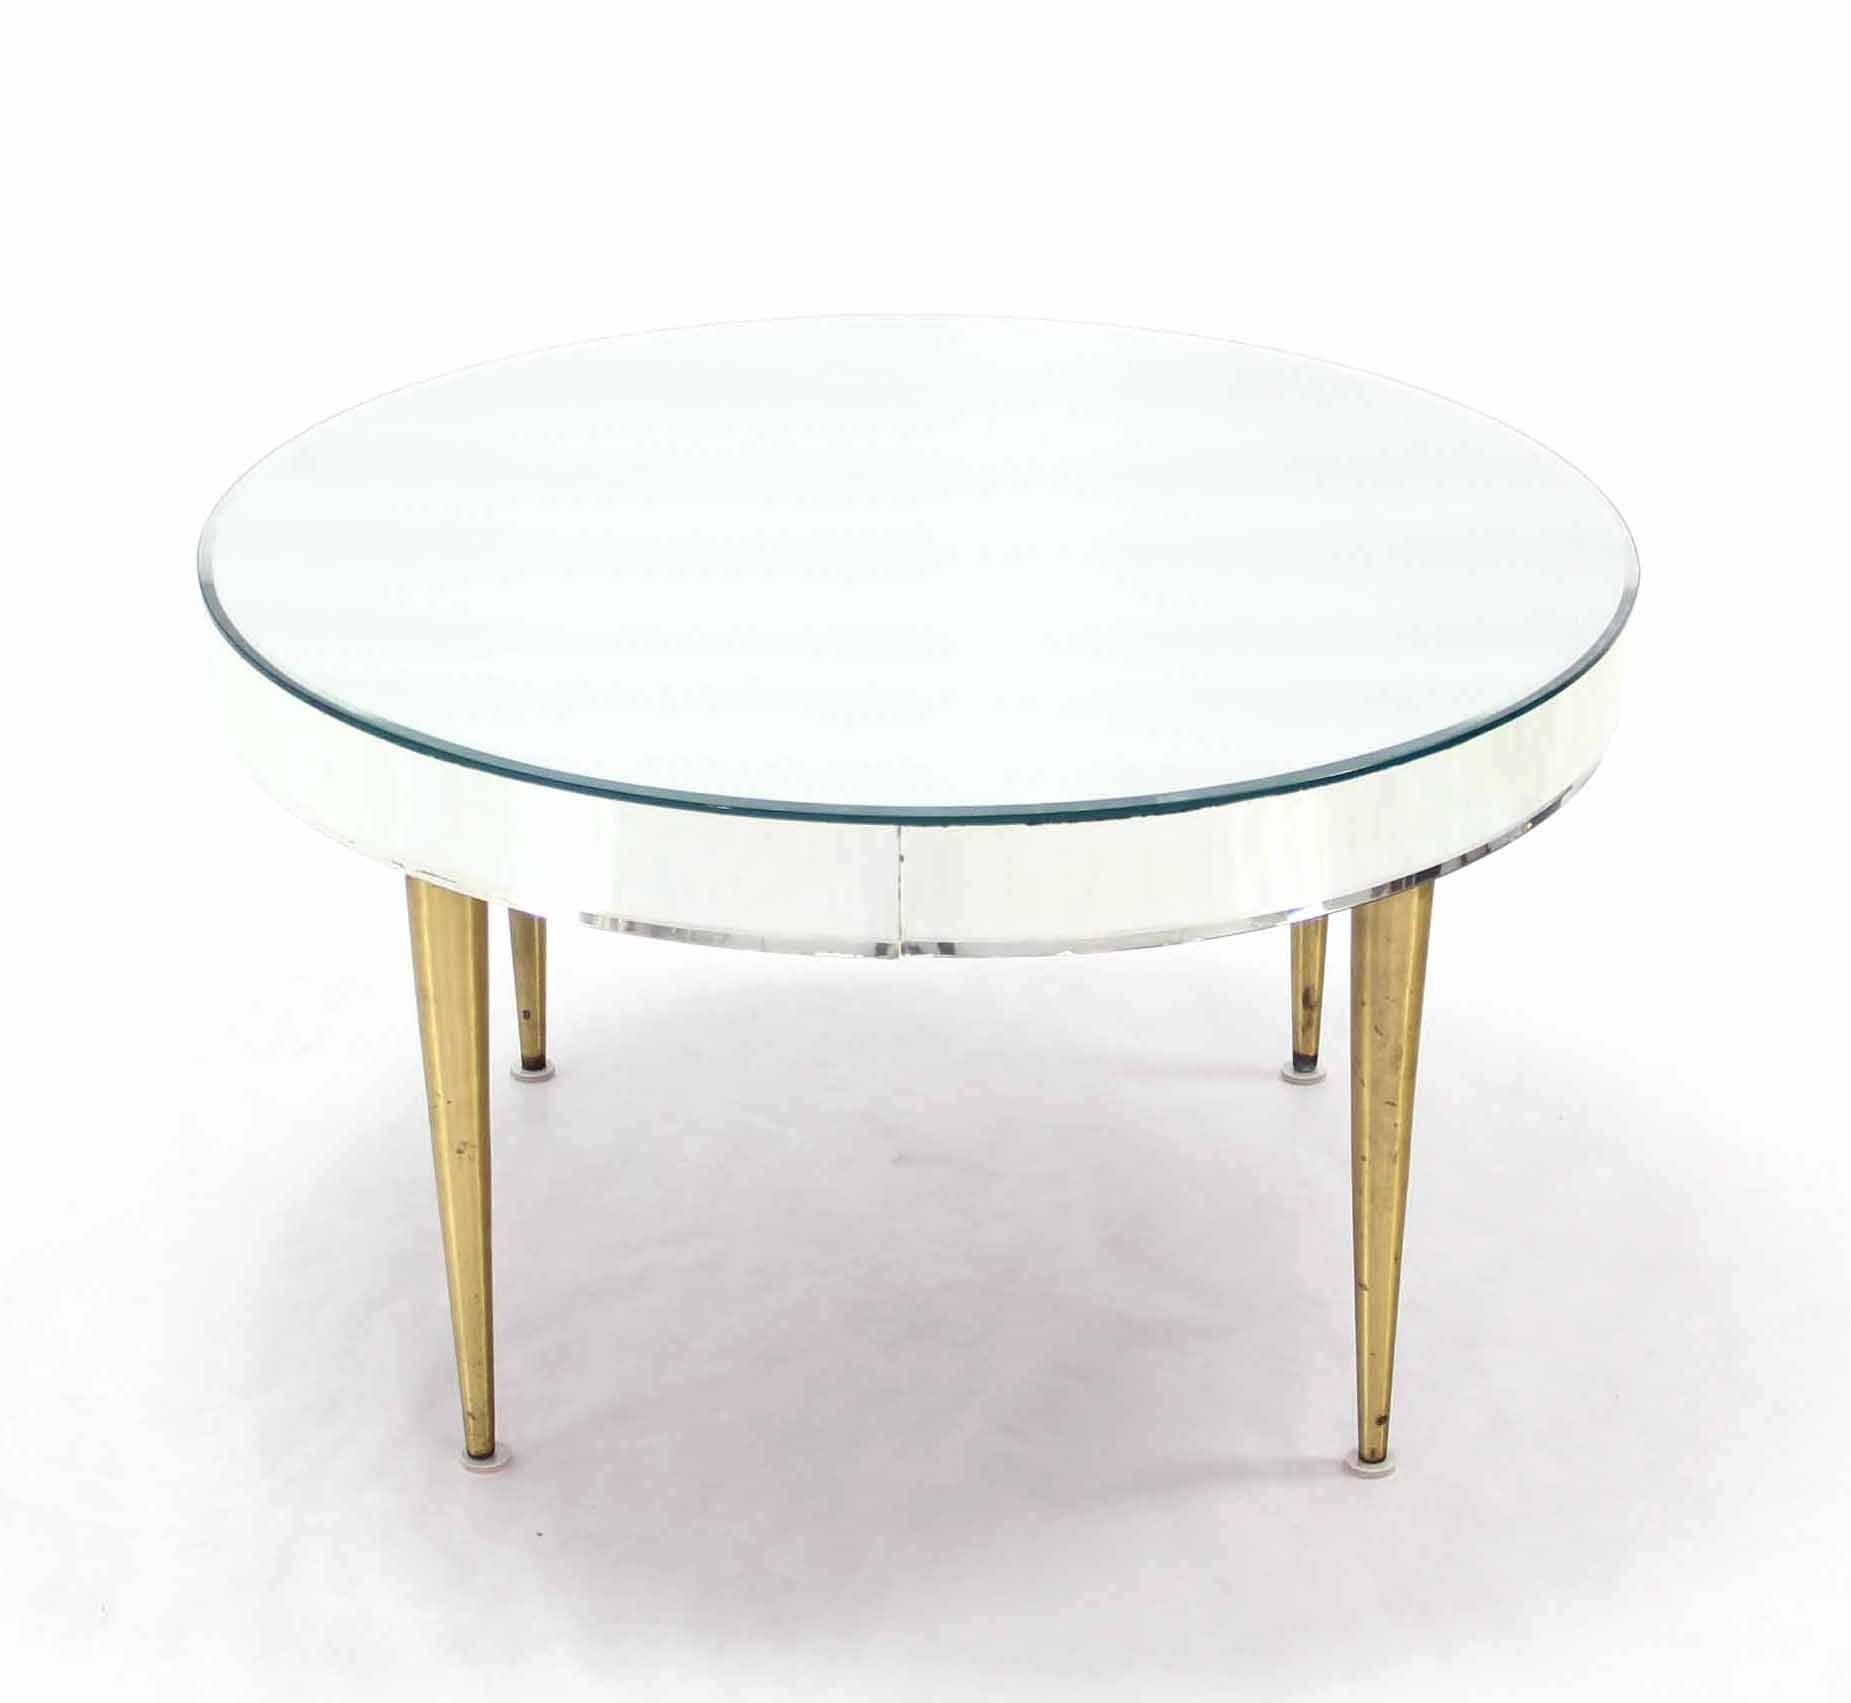 American Mirrored Top Drum Shape Coffee Table Bent Glass 